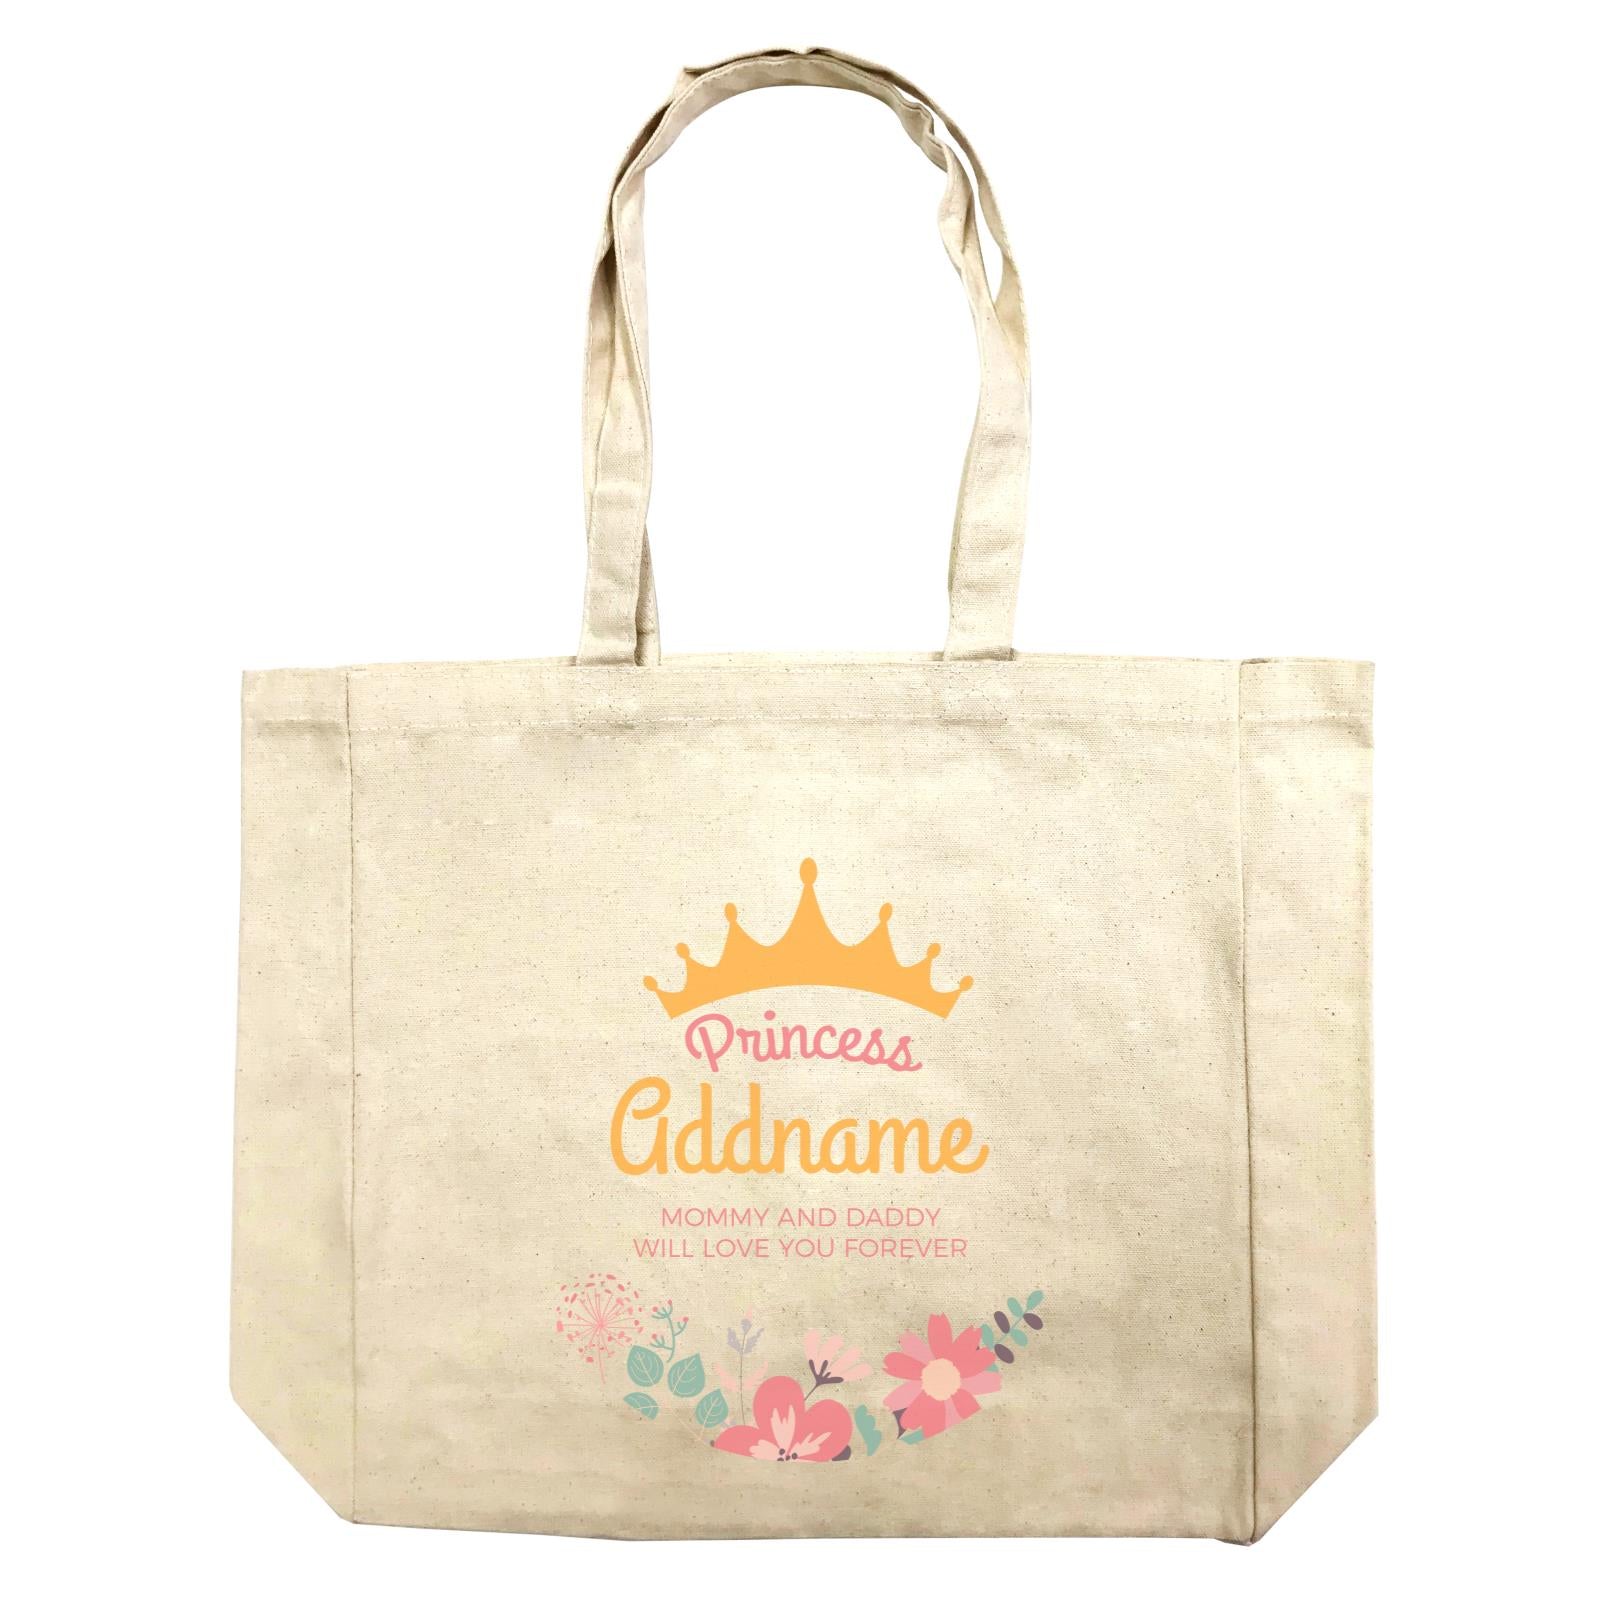 Princess with Tiara and Flowers 2 Personalizable with Name and Text Shopping Bag